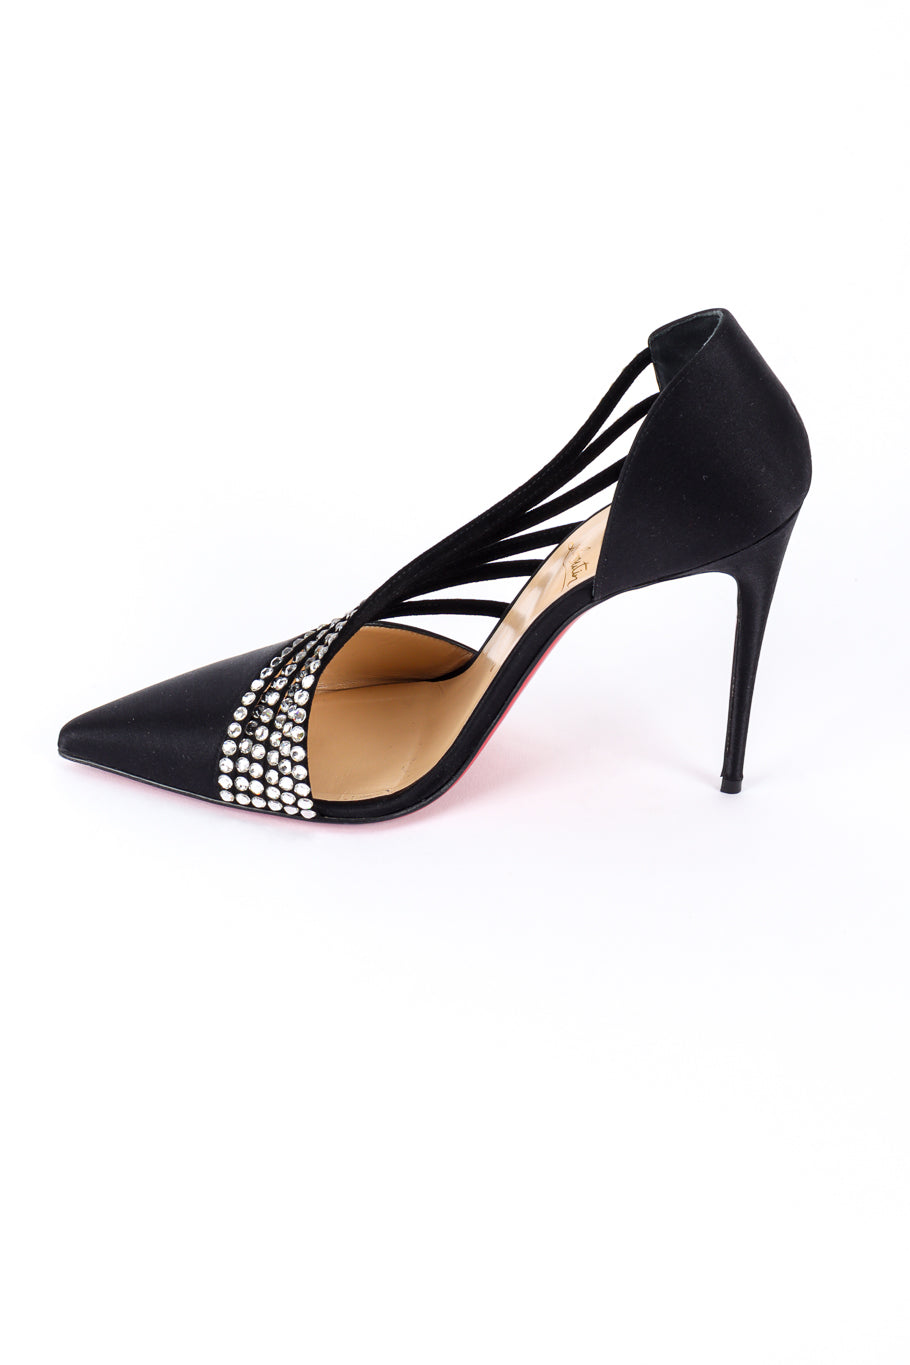 Christian Louboutin Crystal Strass Satin Pumps right shoe inner side @recess la